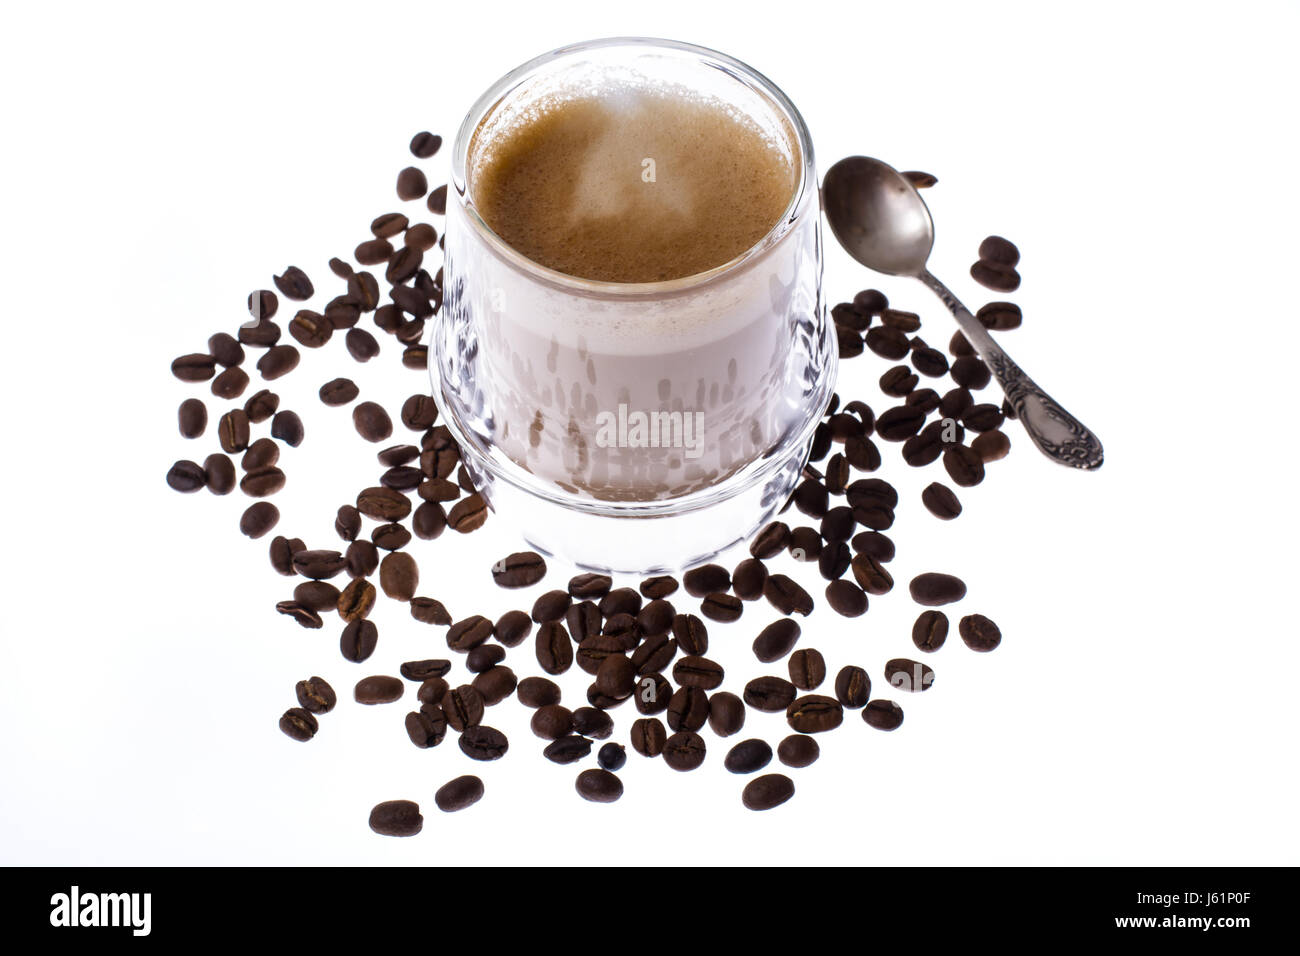 Coffee with milk in glass cup on white background. Studio Photo Stock Photo